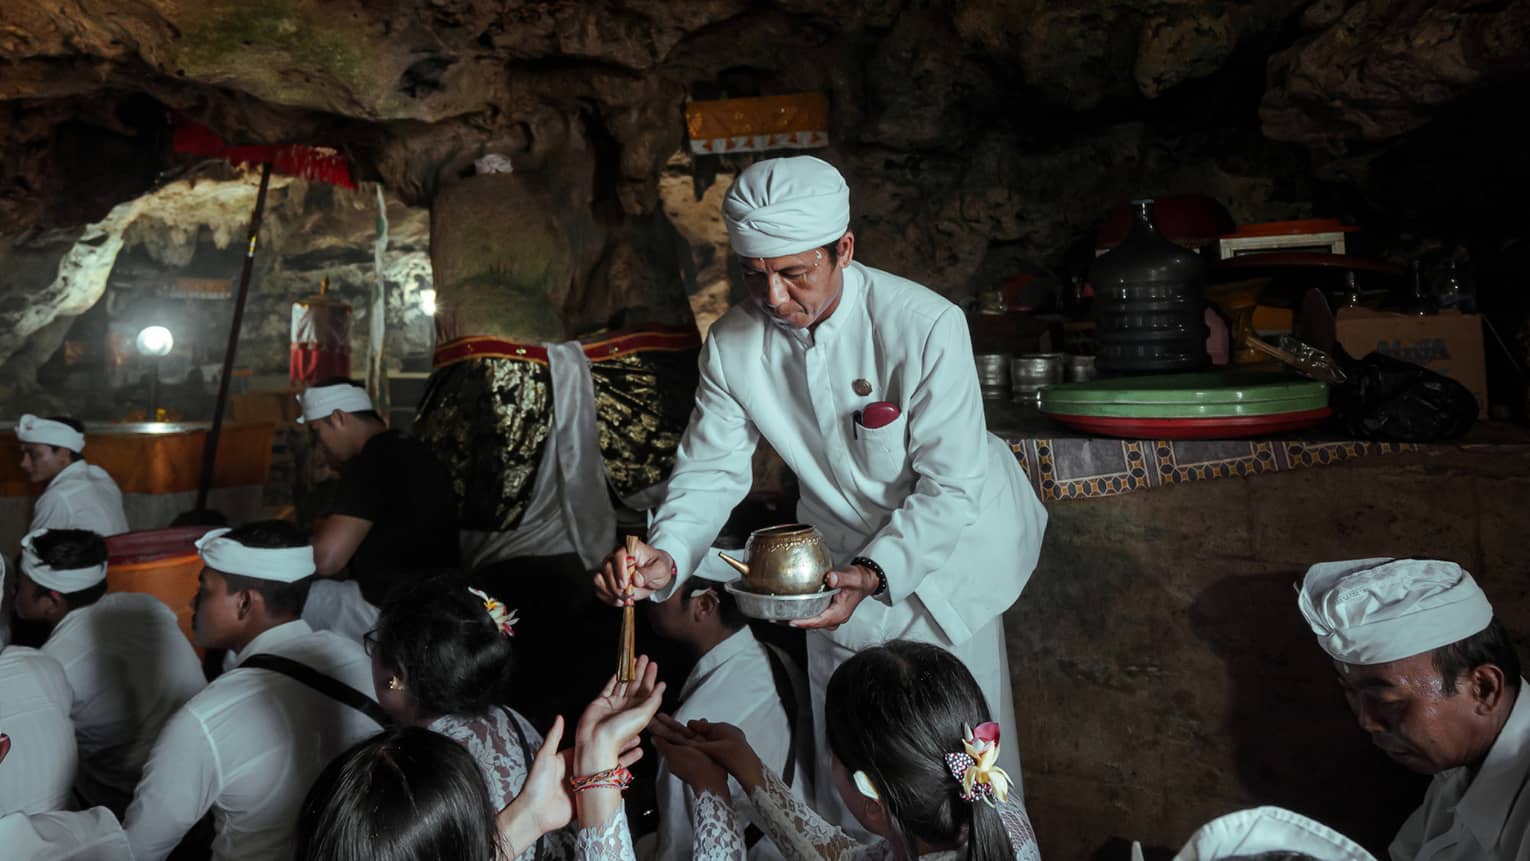 A healing ritual is performed within a cave temple